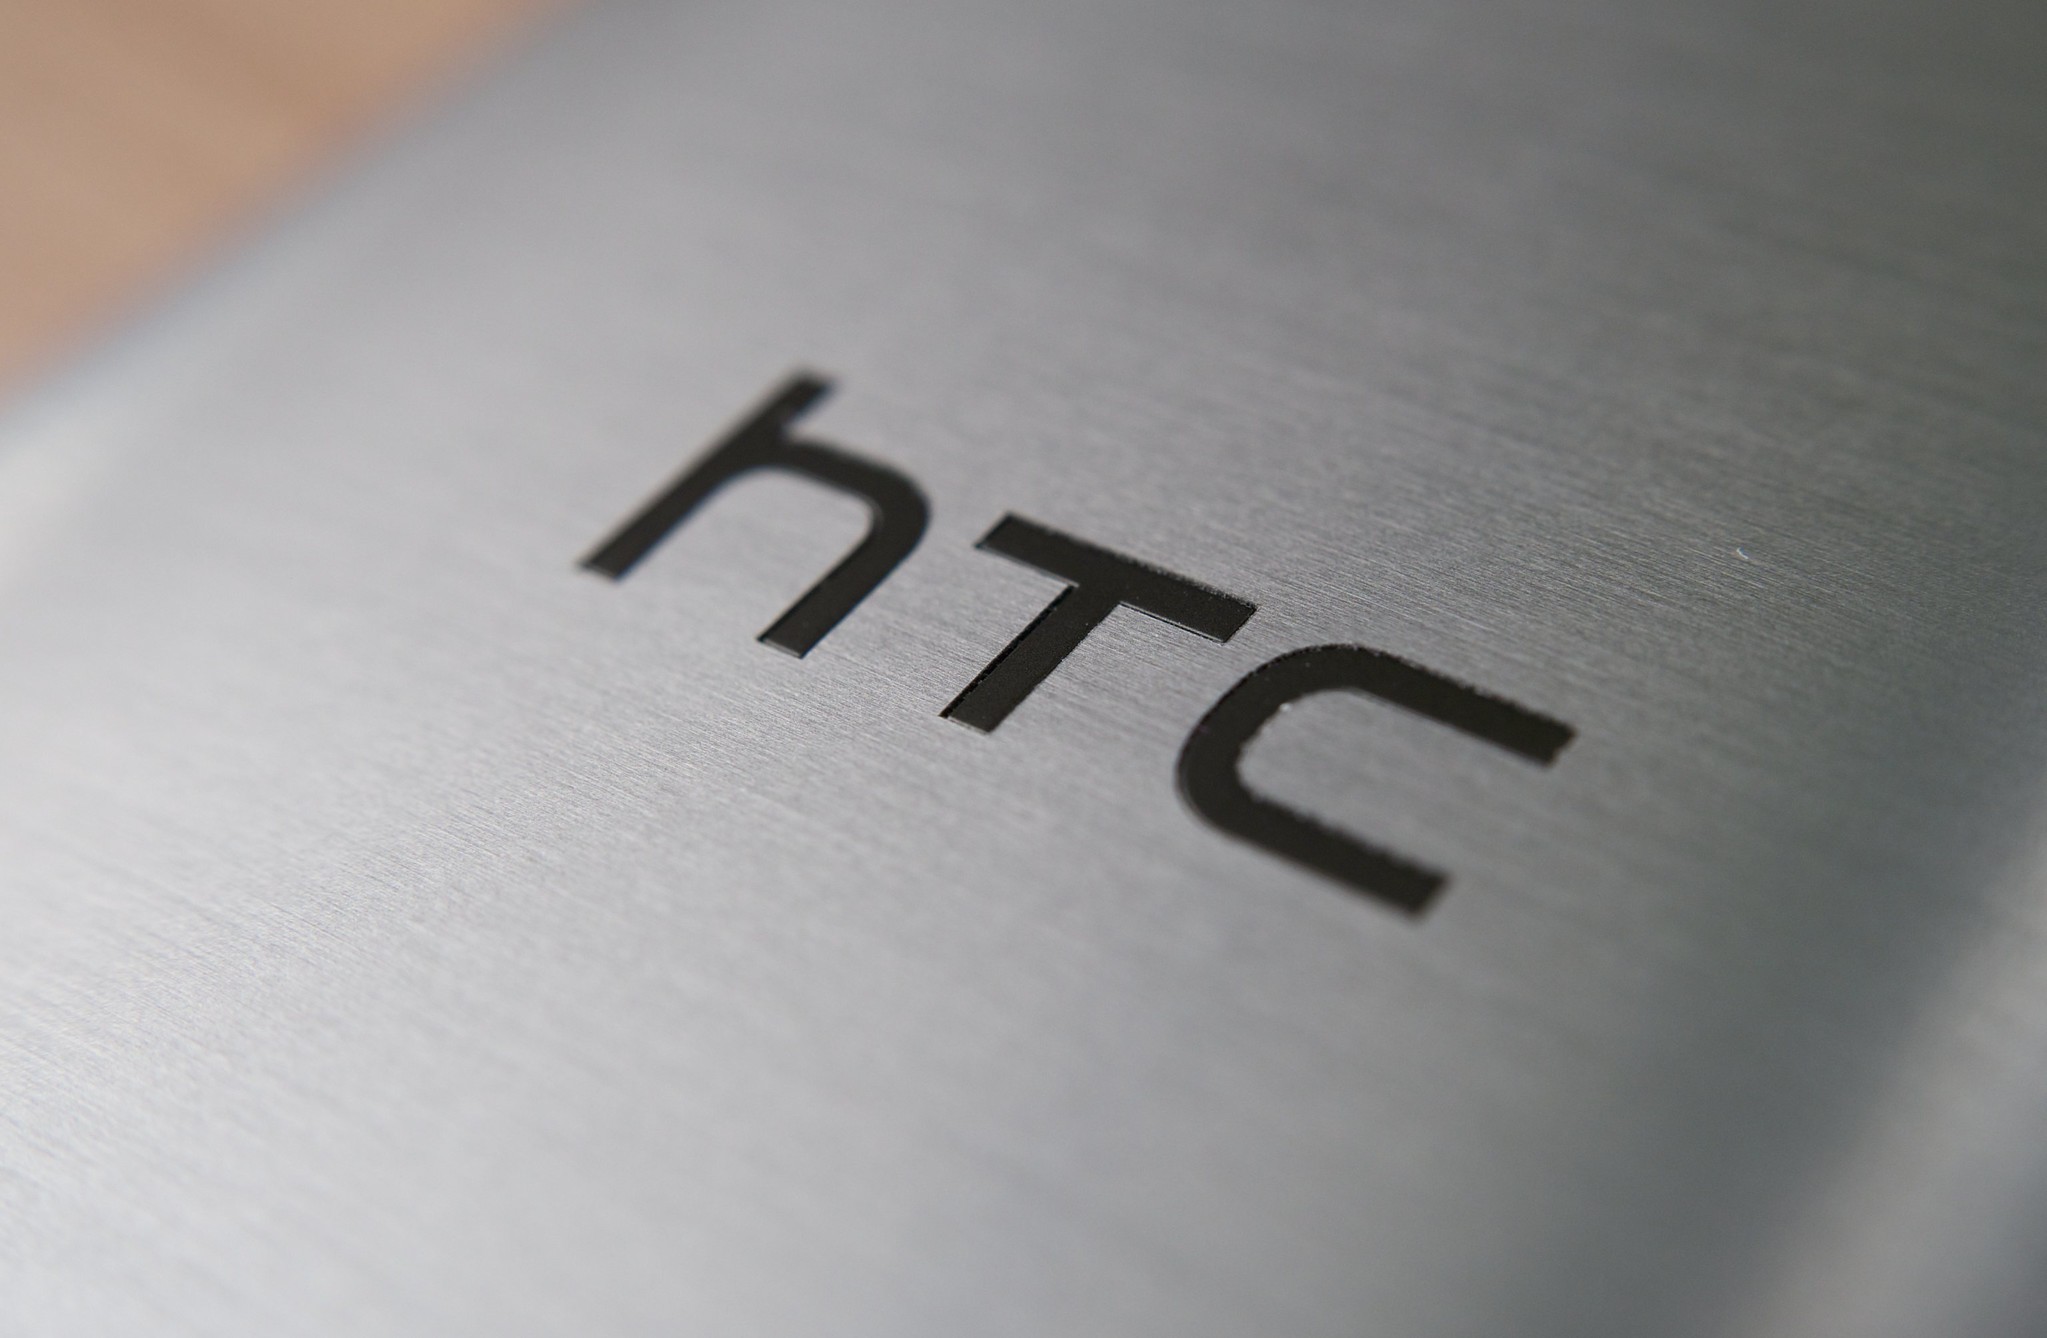 Overview of the smartphone HTC Wildfire R70 with key features